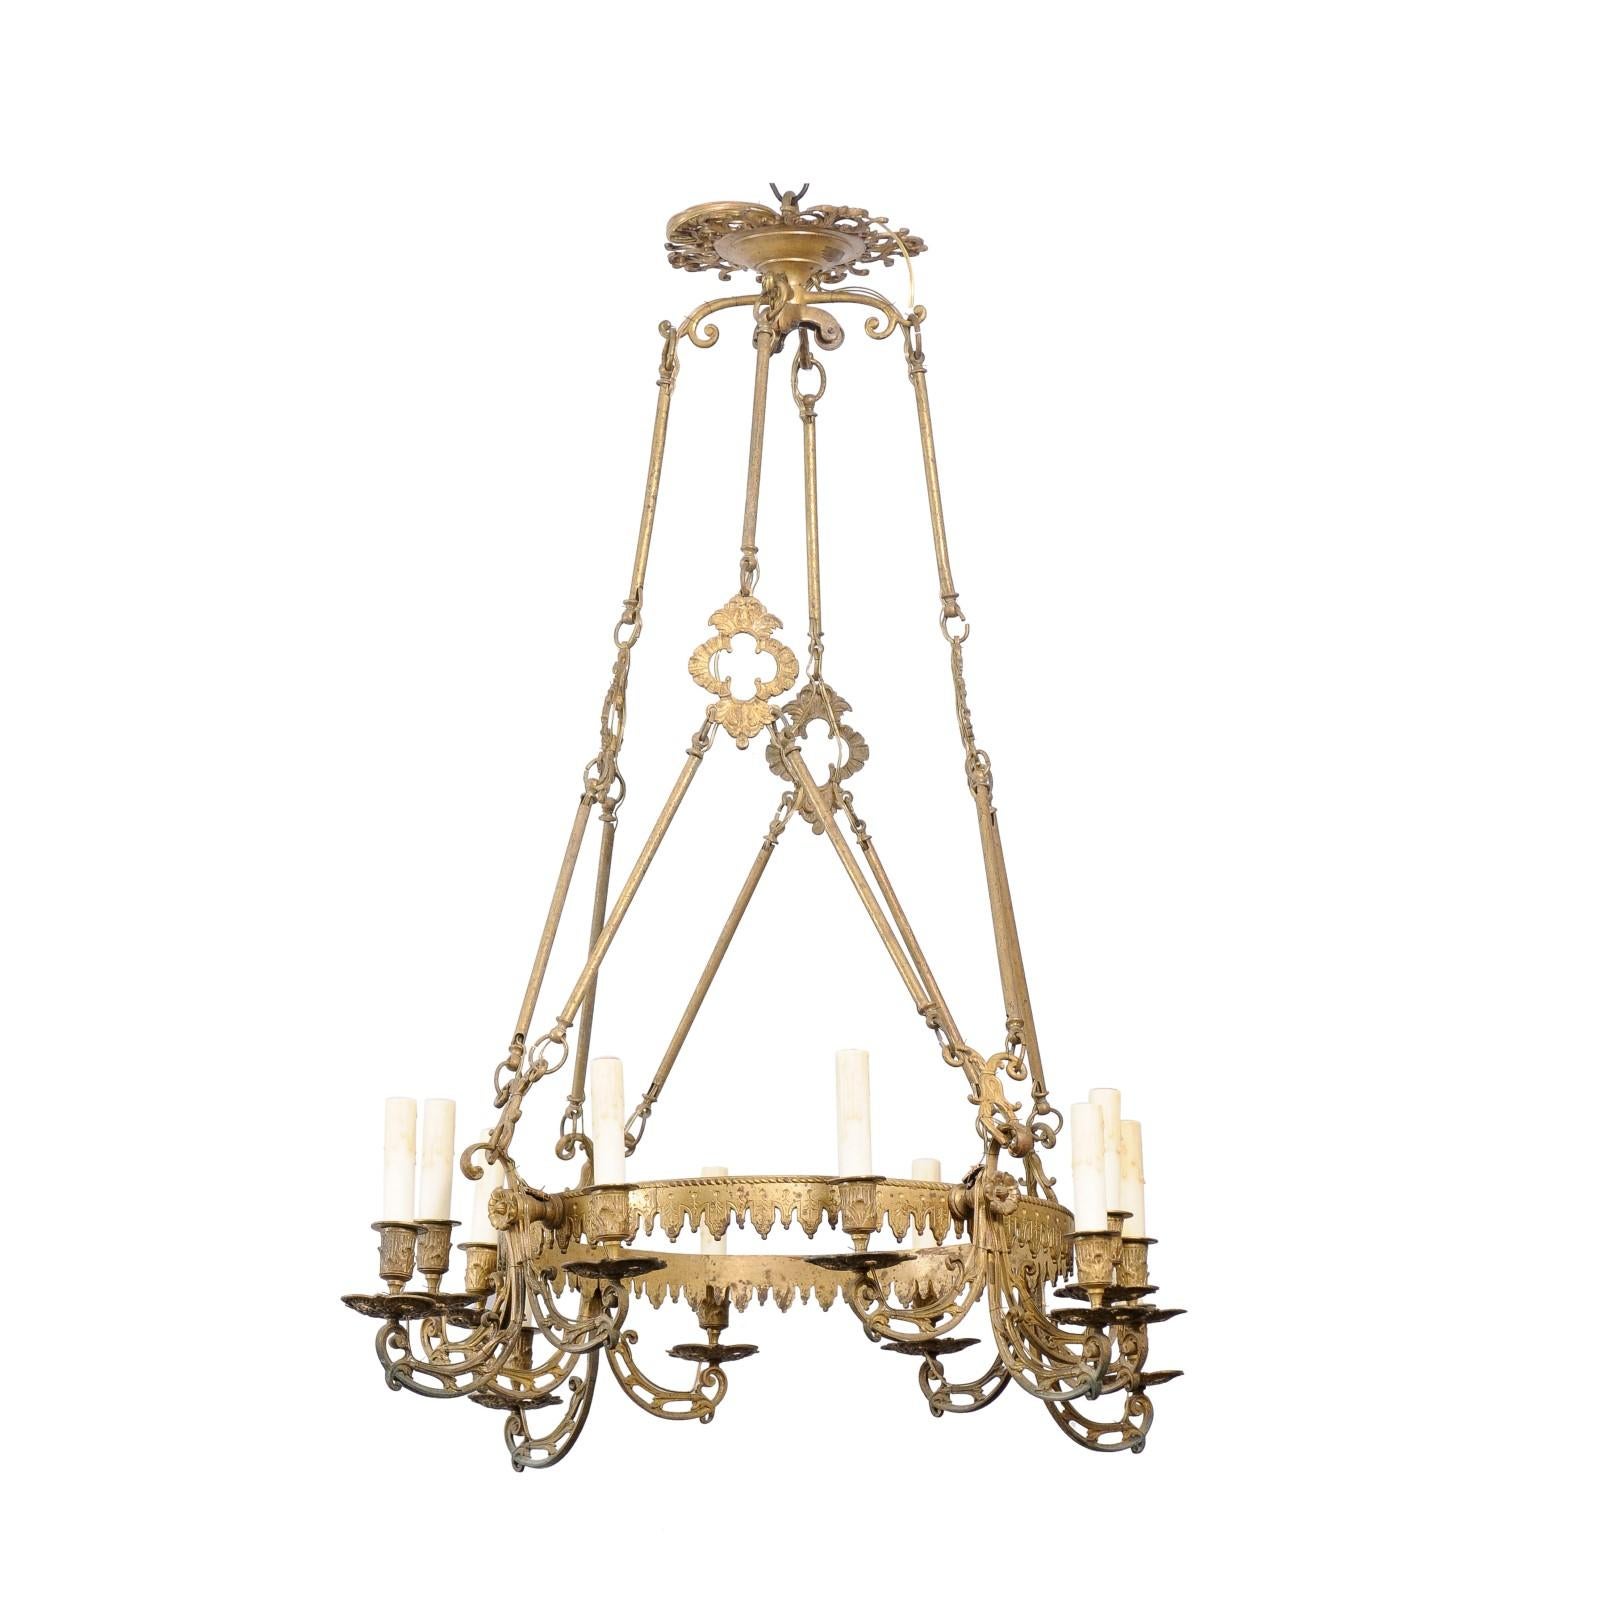 French 19th Century Bronze Twelve Light Ring Chandelier with Scrolling Arms For Sale